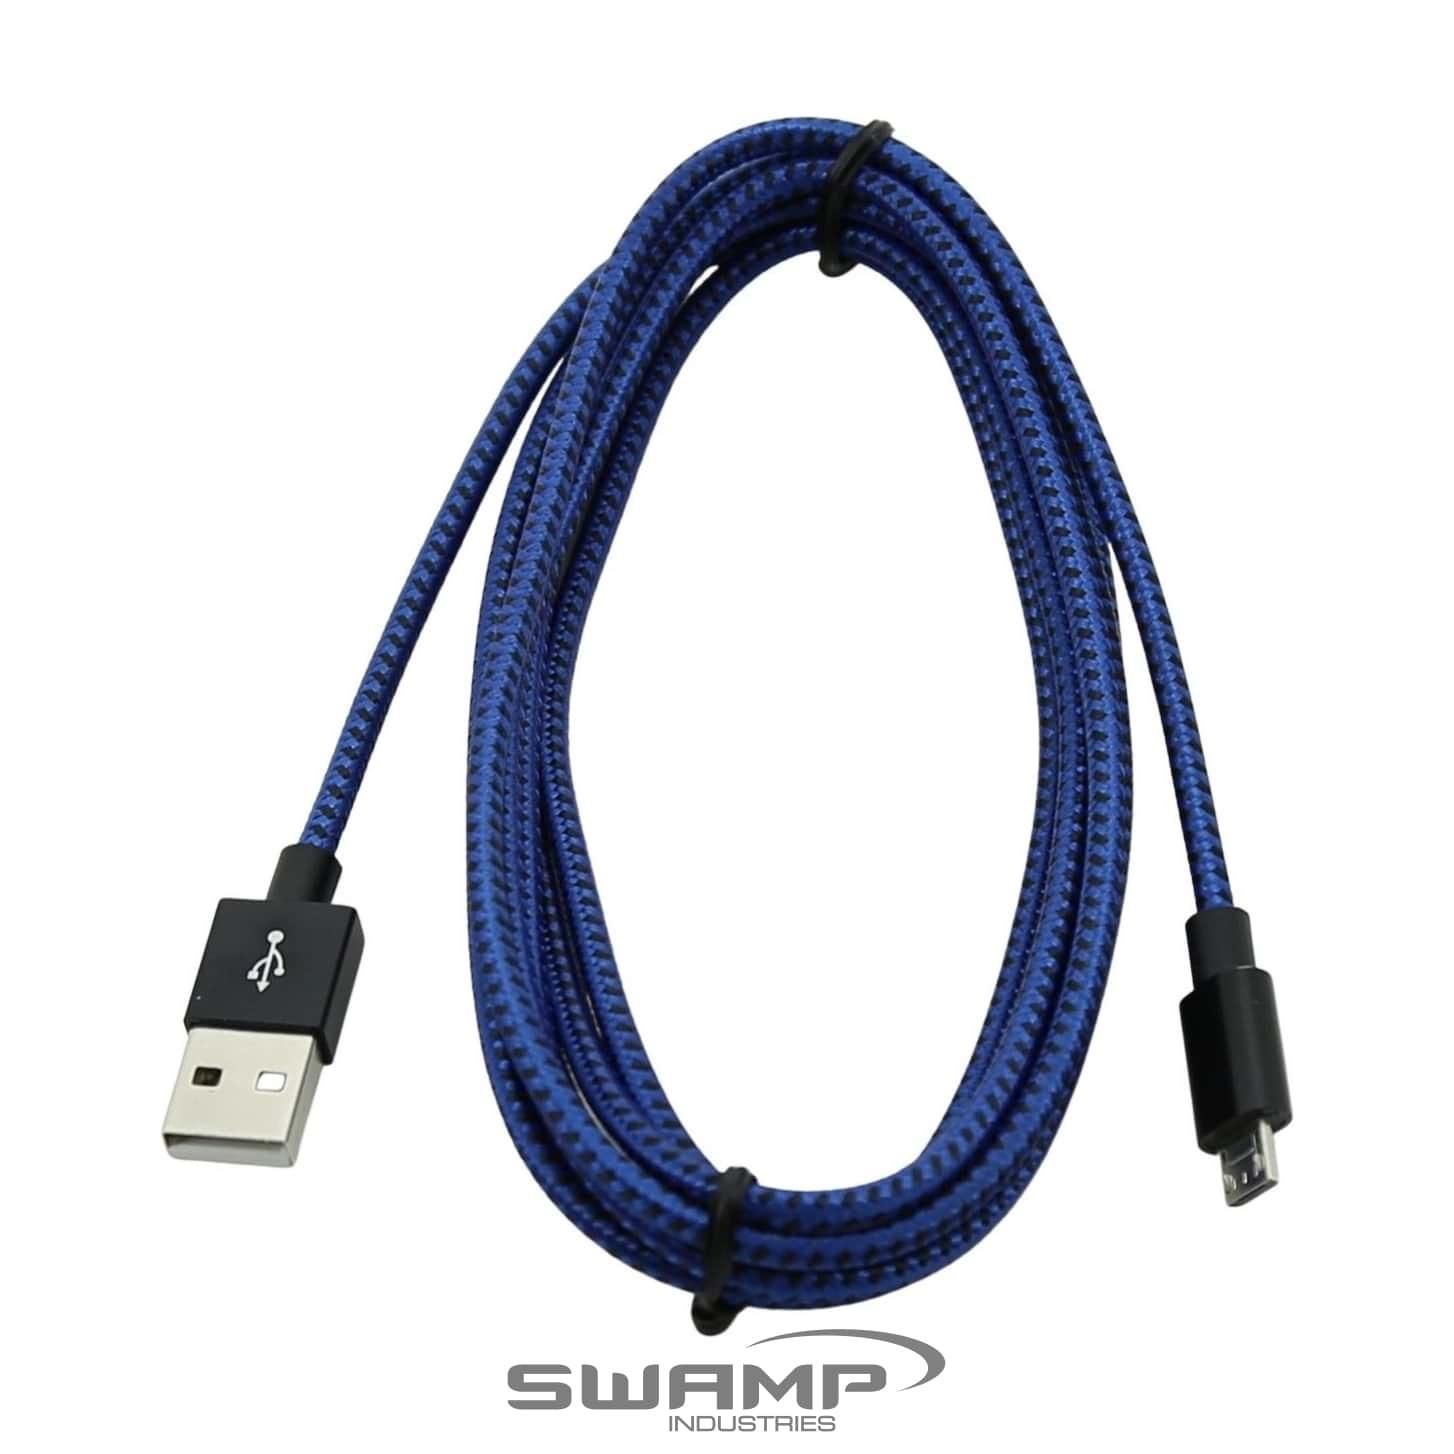 UGREEN Premium Micro USB to USB 2.0 Type A Cable Braided Jacket - BLUE - 150cm